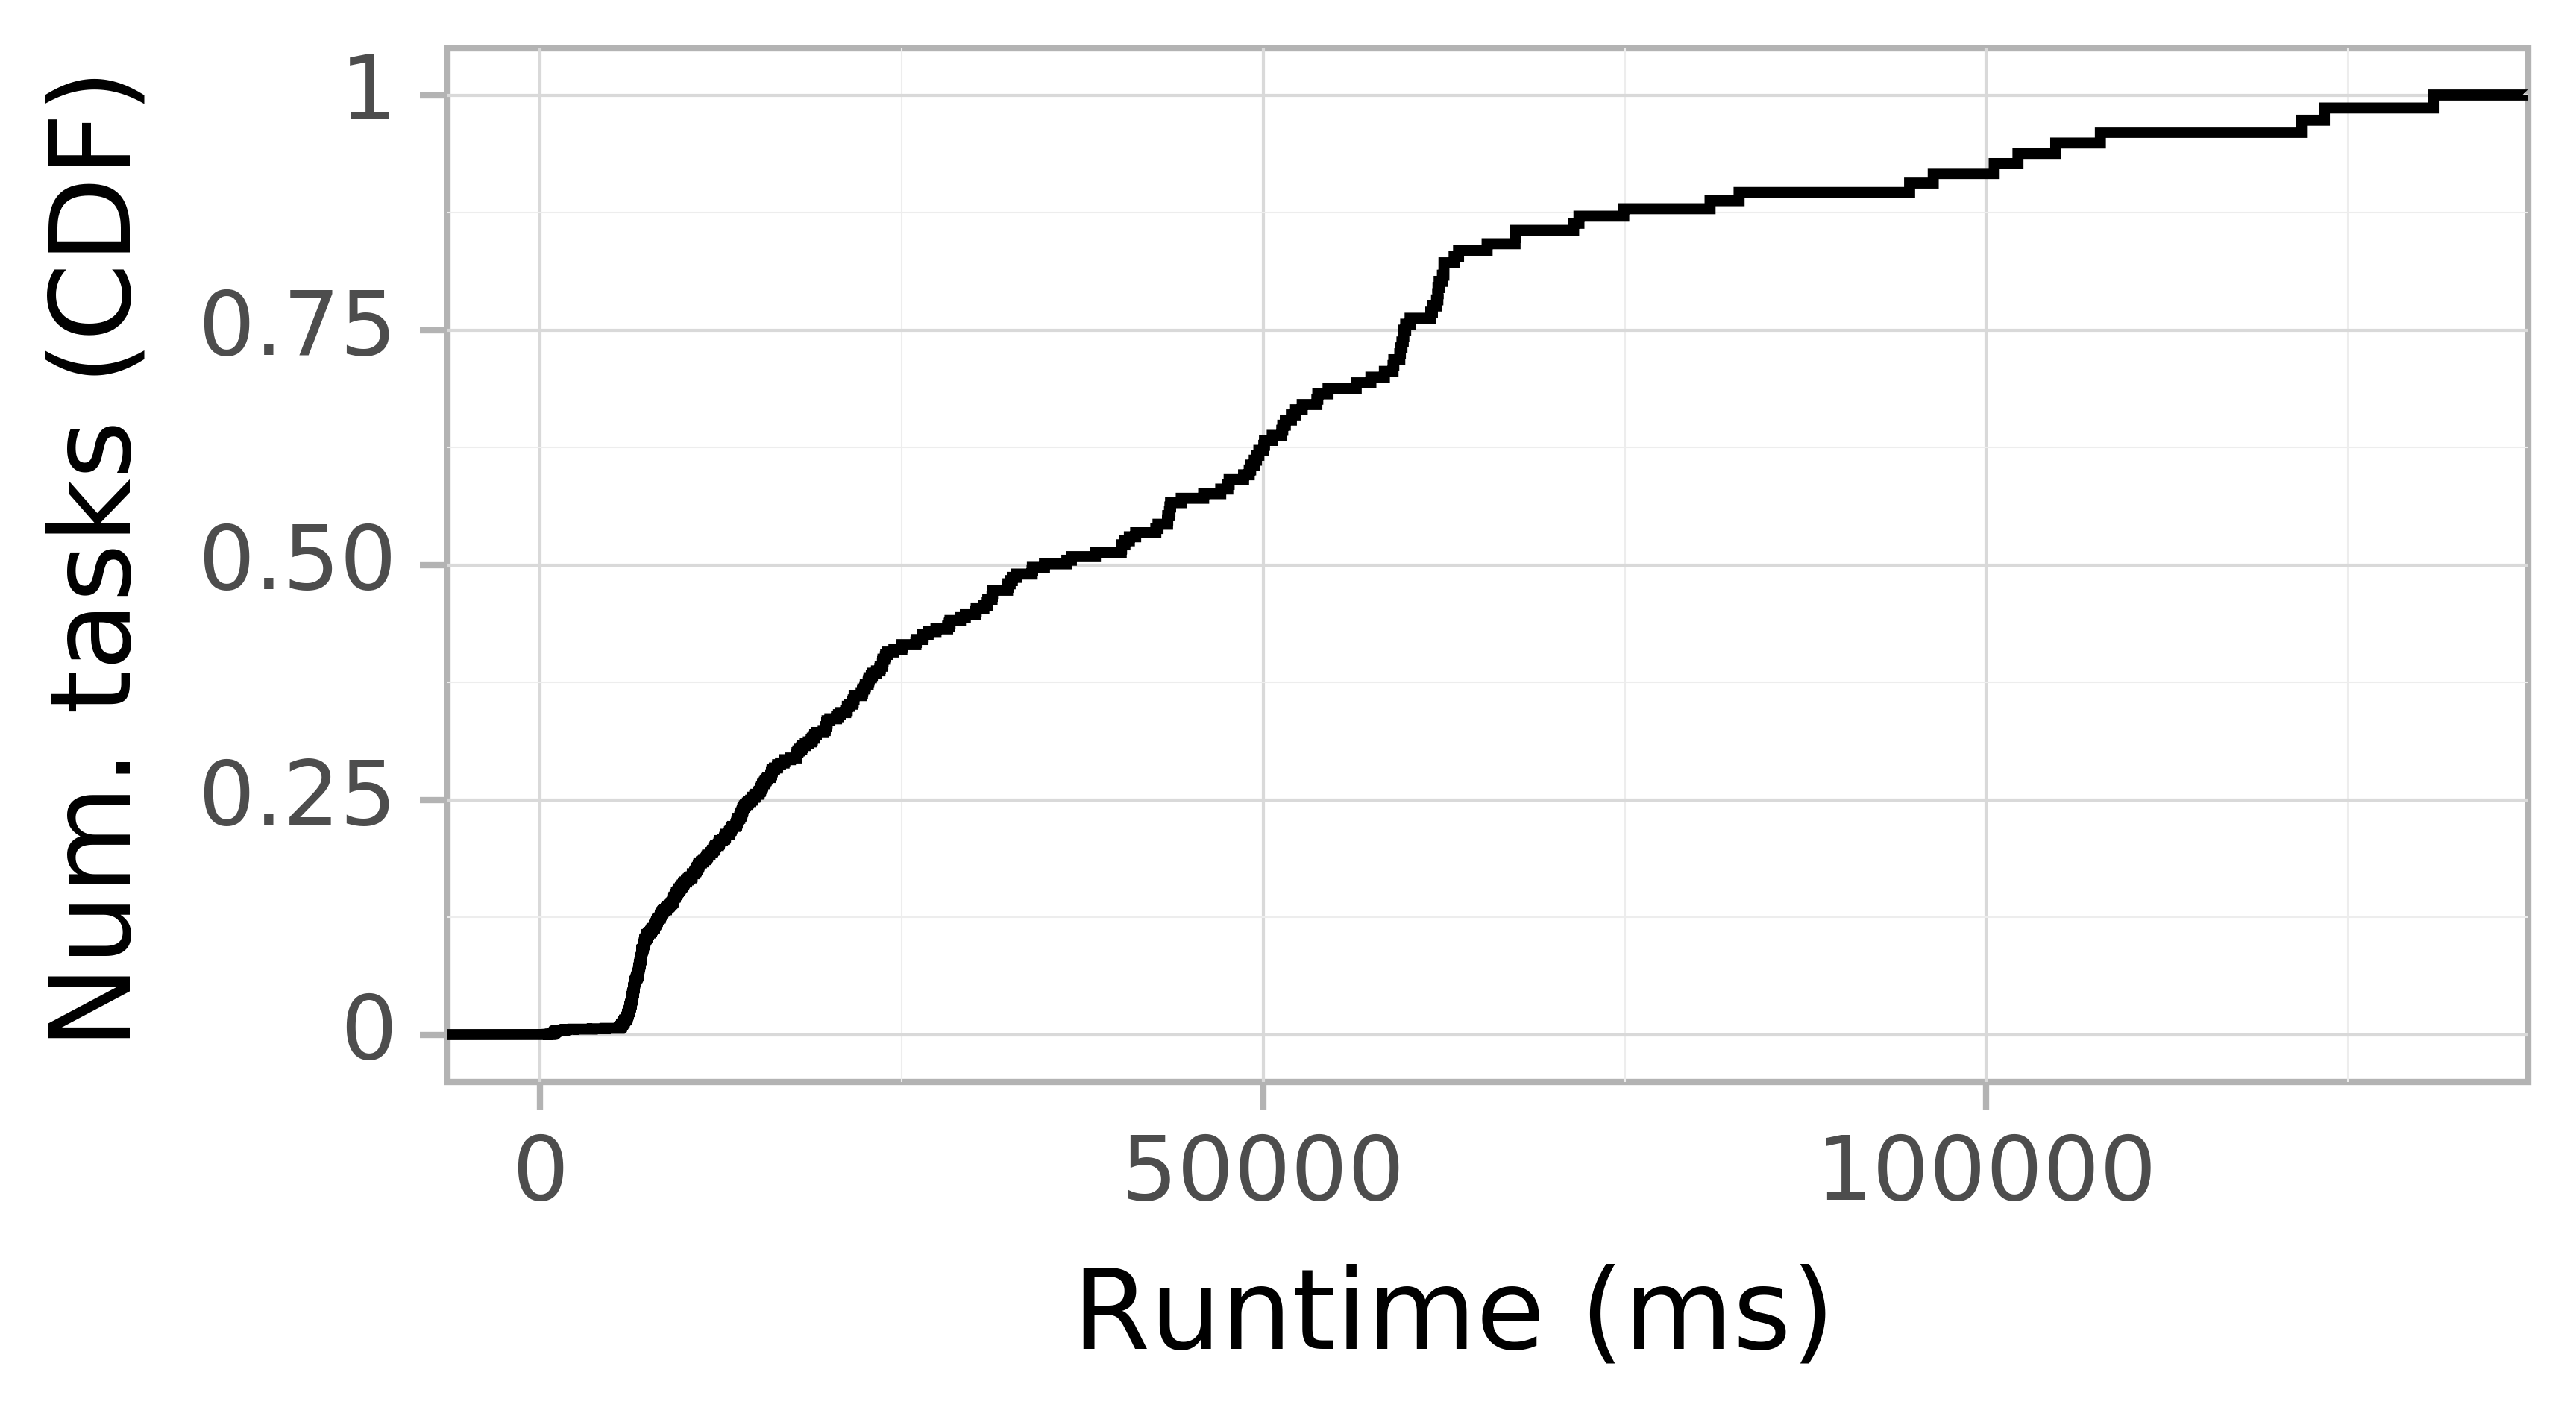 Task runtime CDF graph for the askalon-new_ee62 trace.